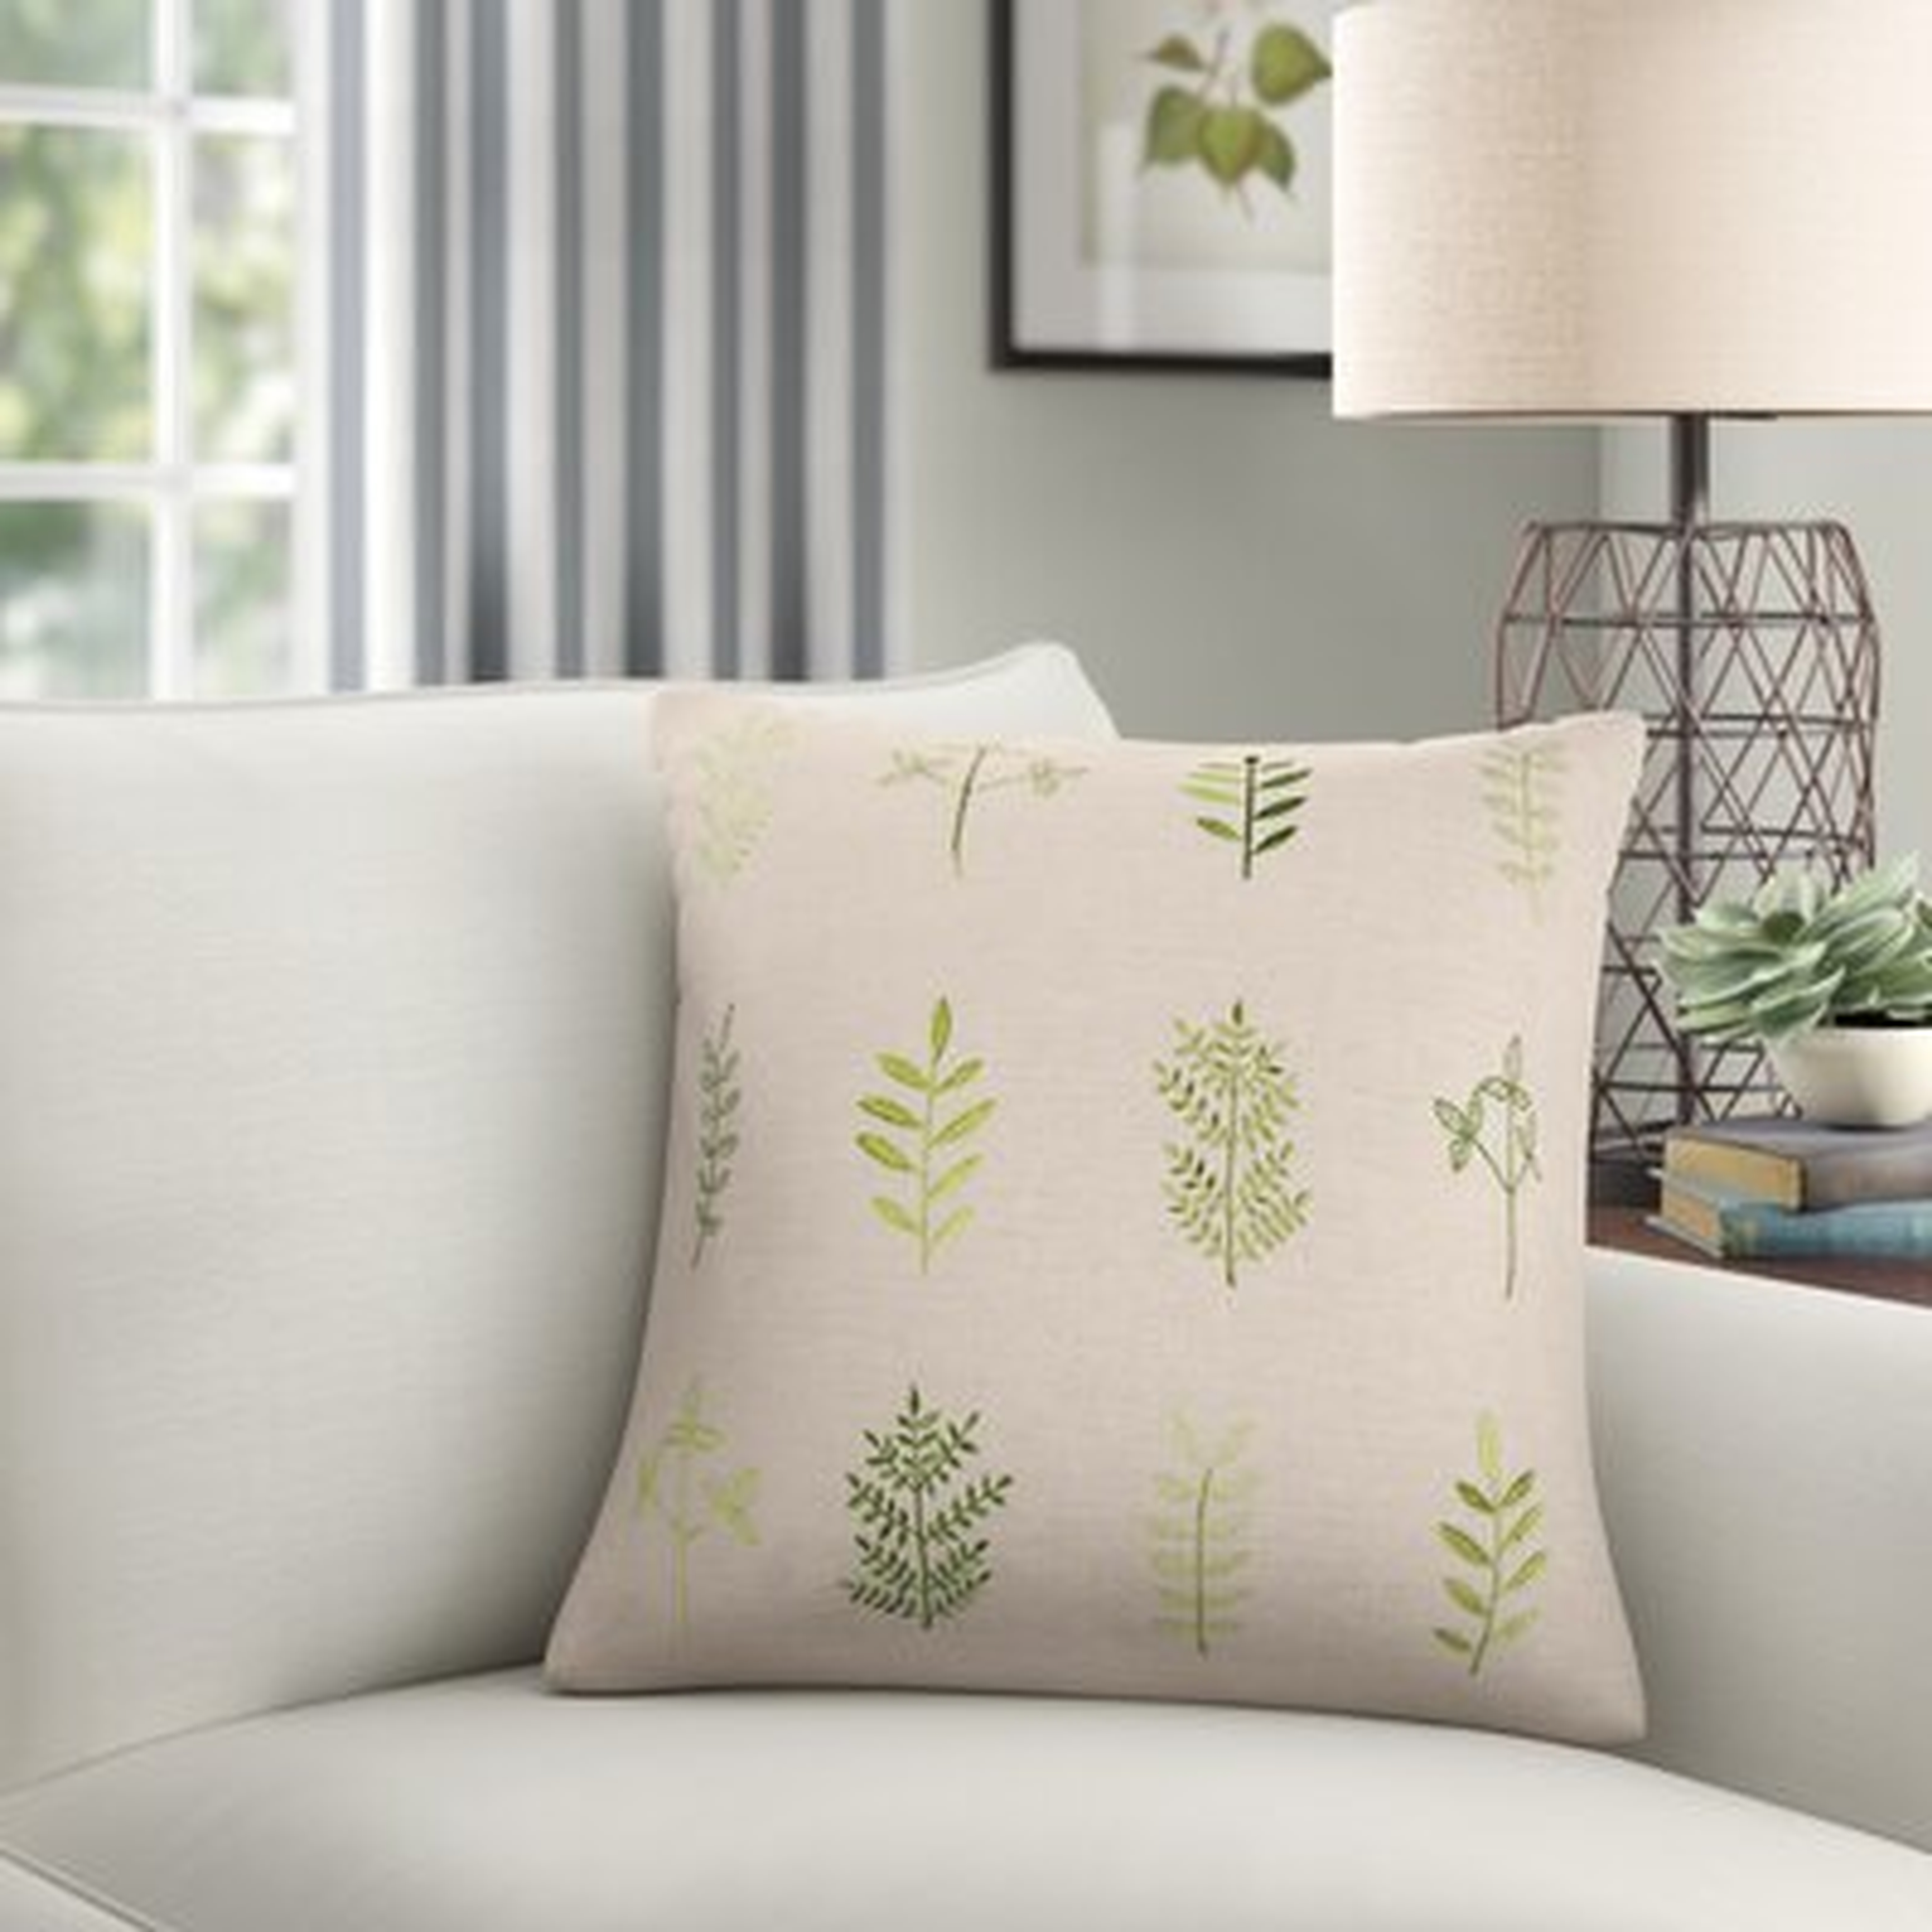 Stirling Square Pillow Cover & Insert - Birch Lane